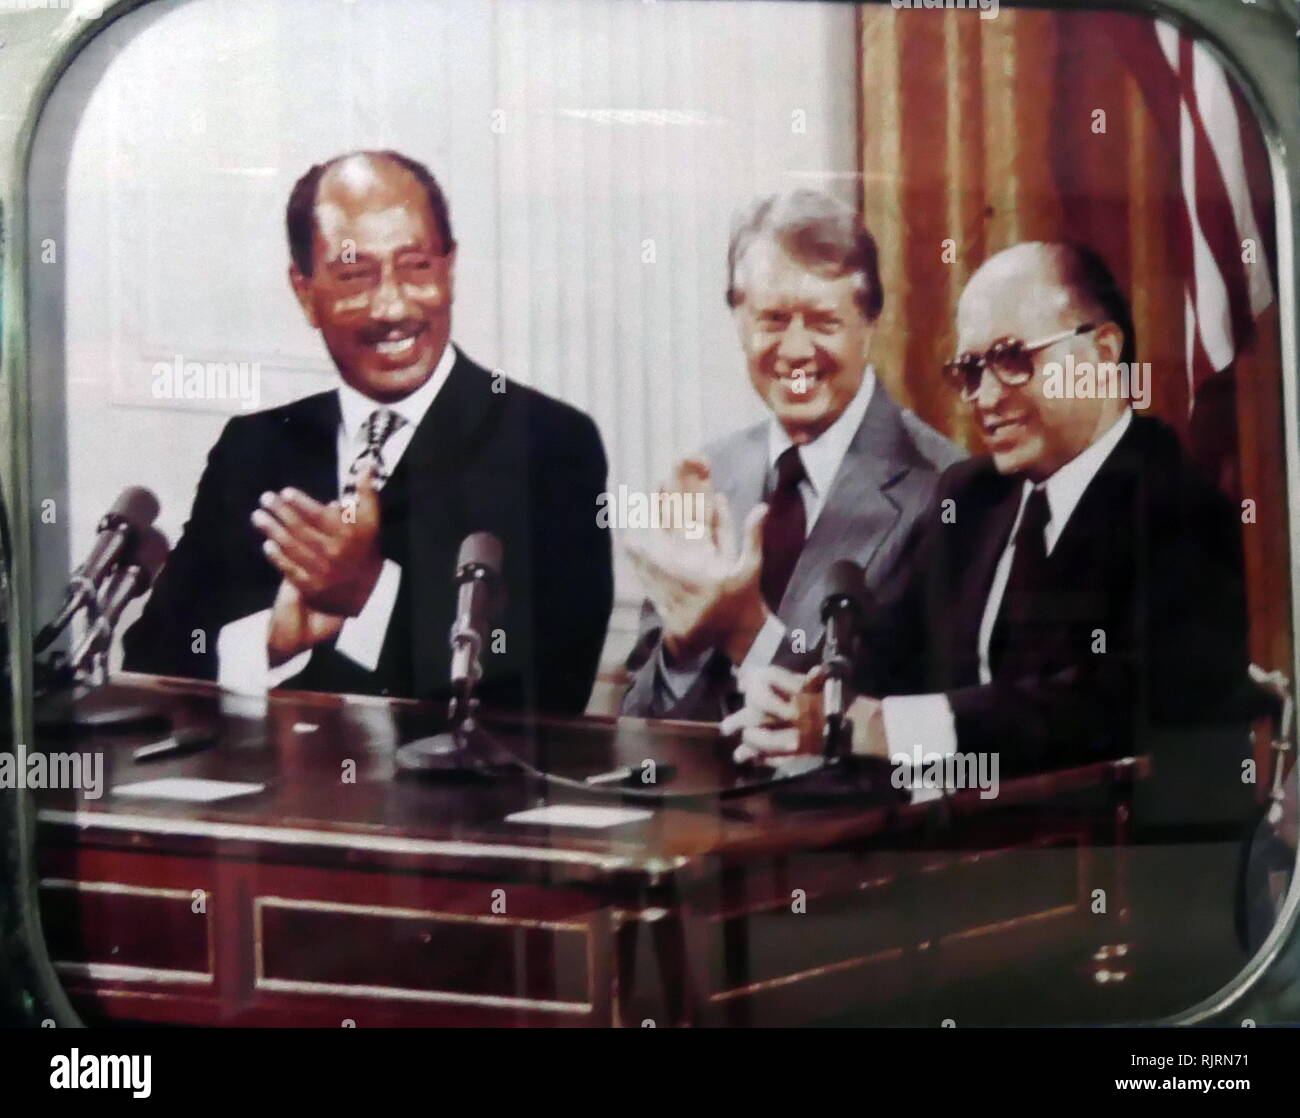 Jimmy Carter, seated with Egyptian President Anwar Sadat and Israeli Prime Minister Menachem Begin, makes statements, following the Camp David Accords. The Camp David Accords were signed by Egyptian President Anwar Sadat and Israeli Prime Minister Menachem Begin on 17 September 1978, following twelve days of secret negotiations at Camp David which in turn, led directly to the 1979 Egypt-Israel Peace Treaty. Stock Photo